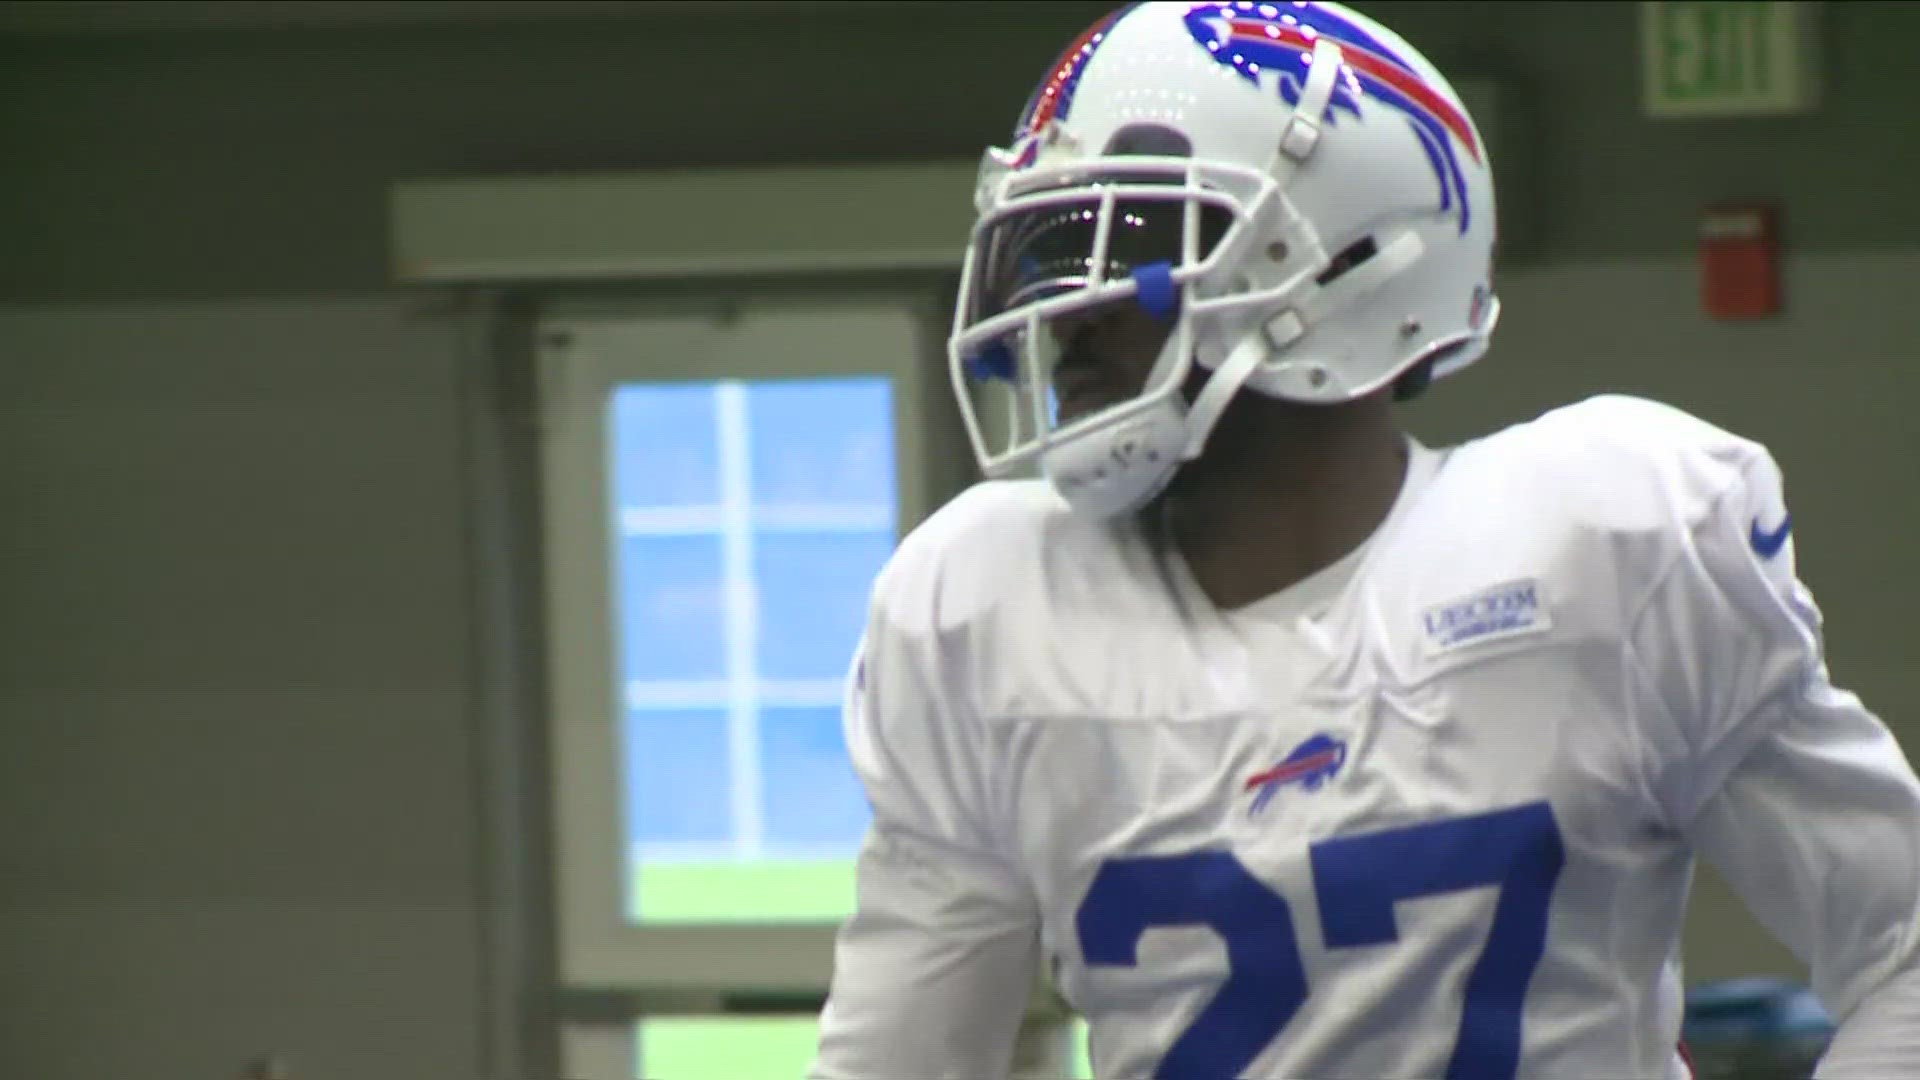 While the battle opposite of Tre'Davious White for a cornerback job rages on, White enters this season primed for a return to form.